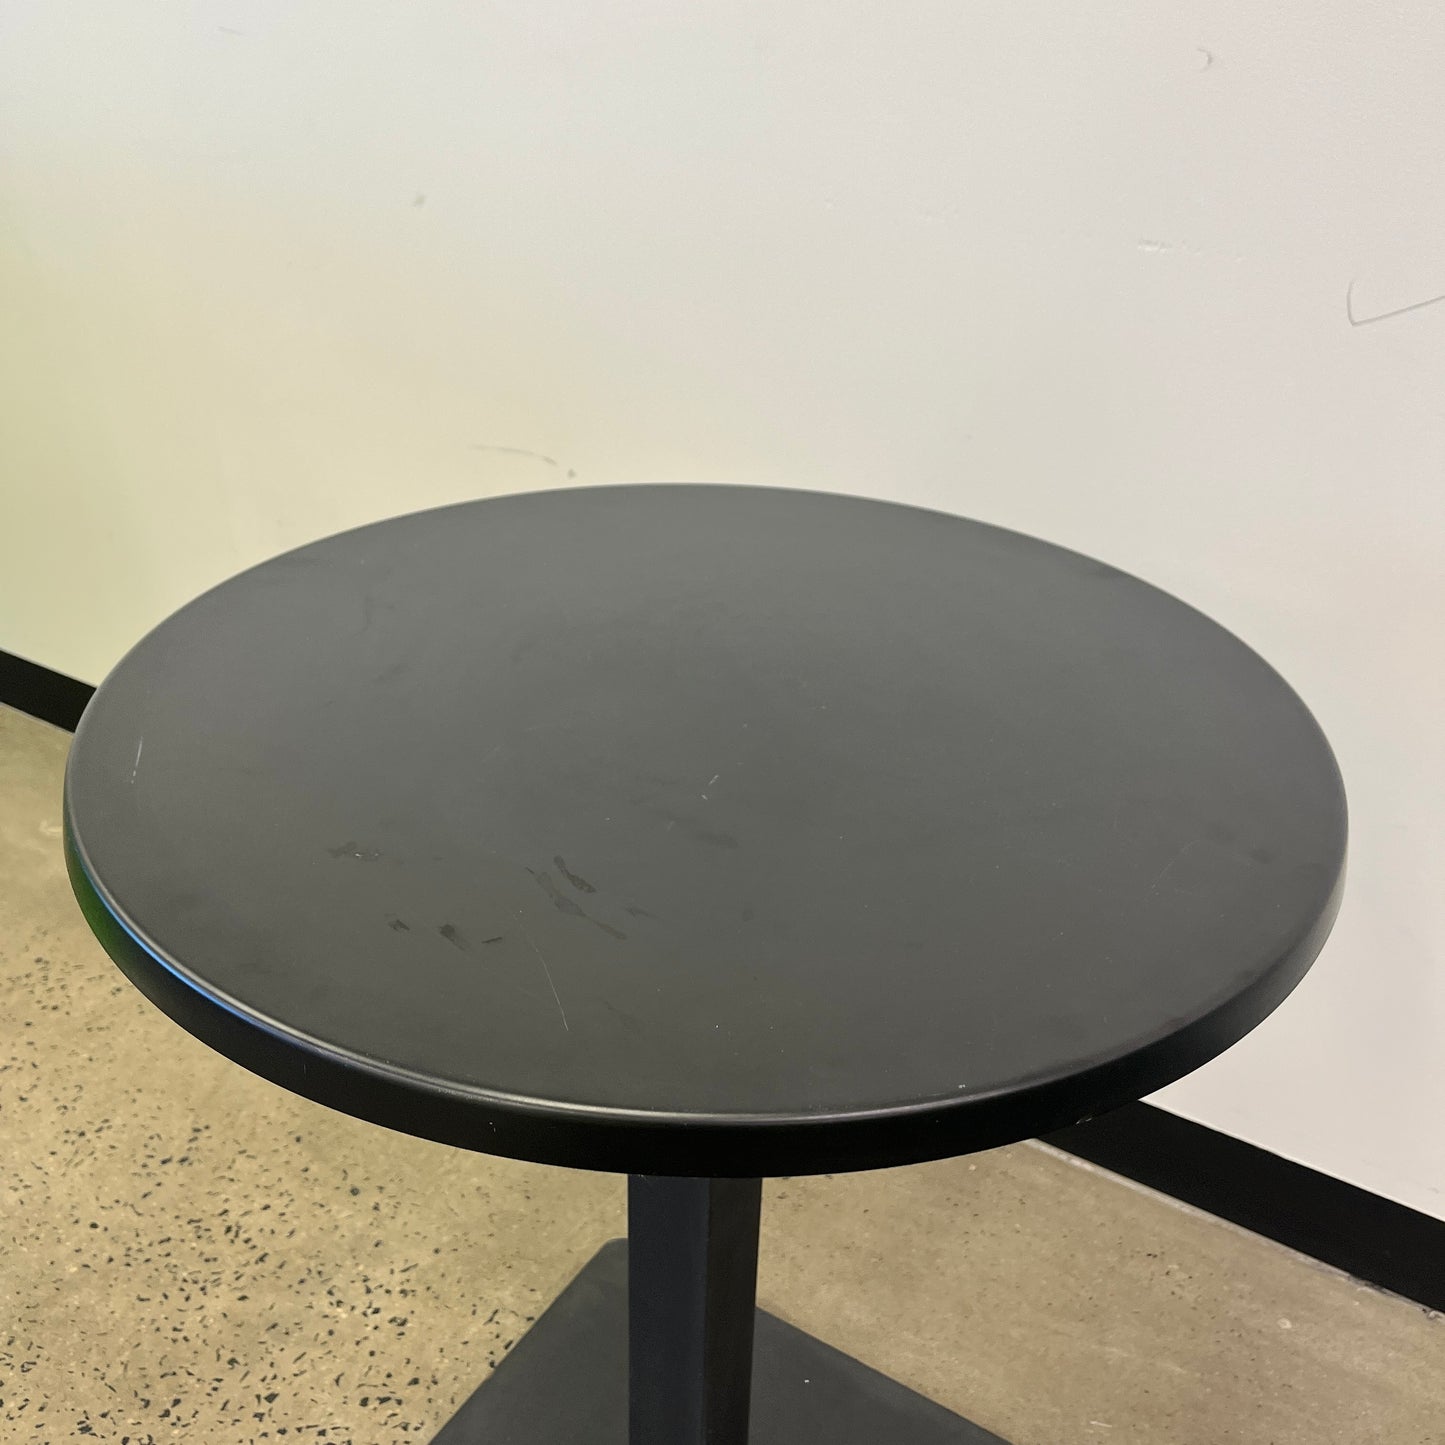 Small Round Cafe Table Tall Black